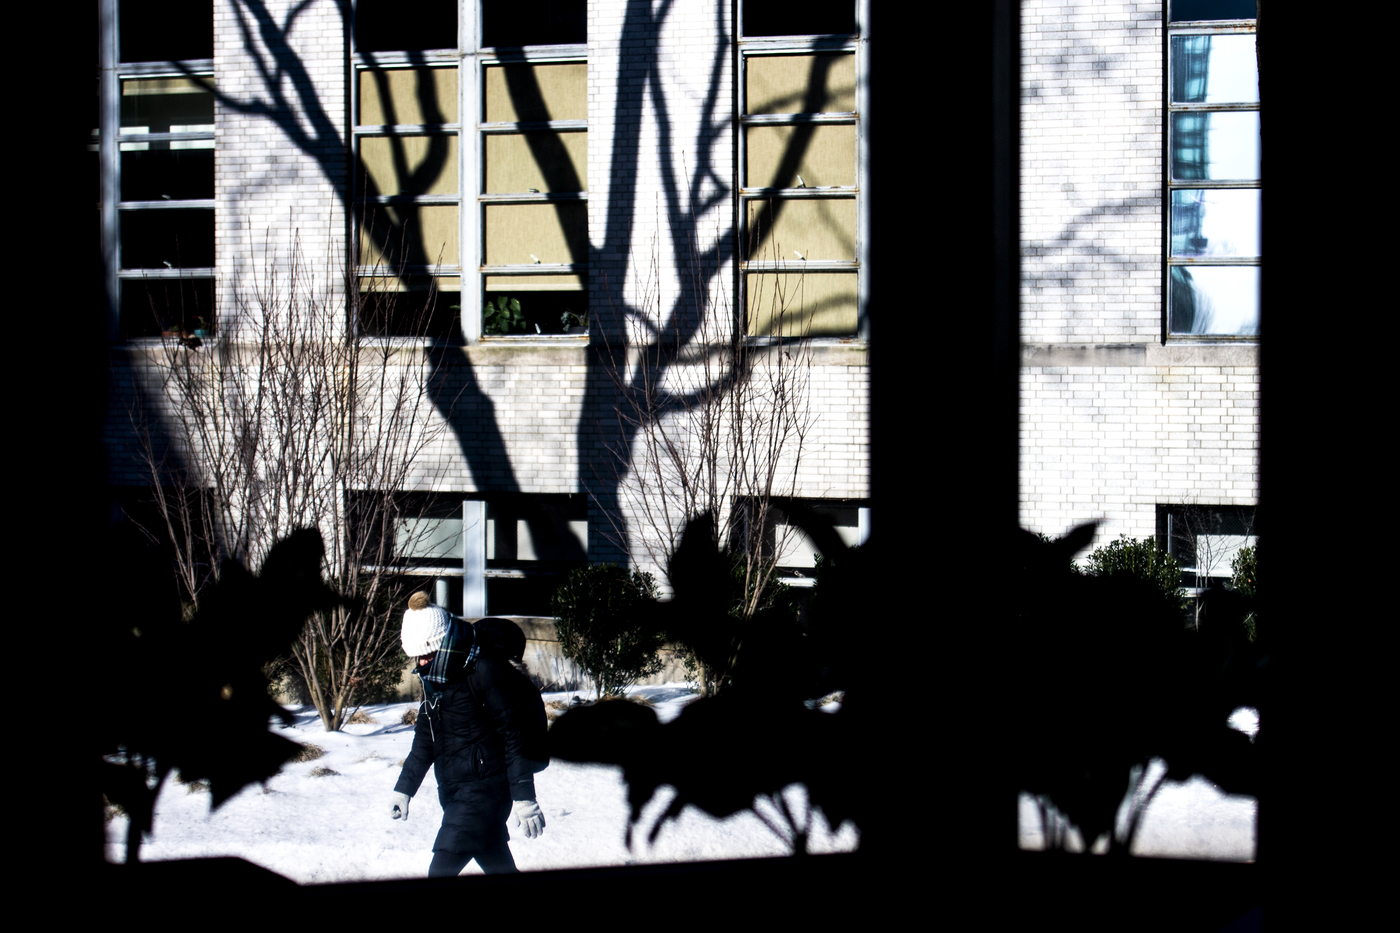 shadows of students walking on campus